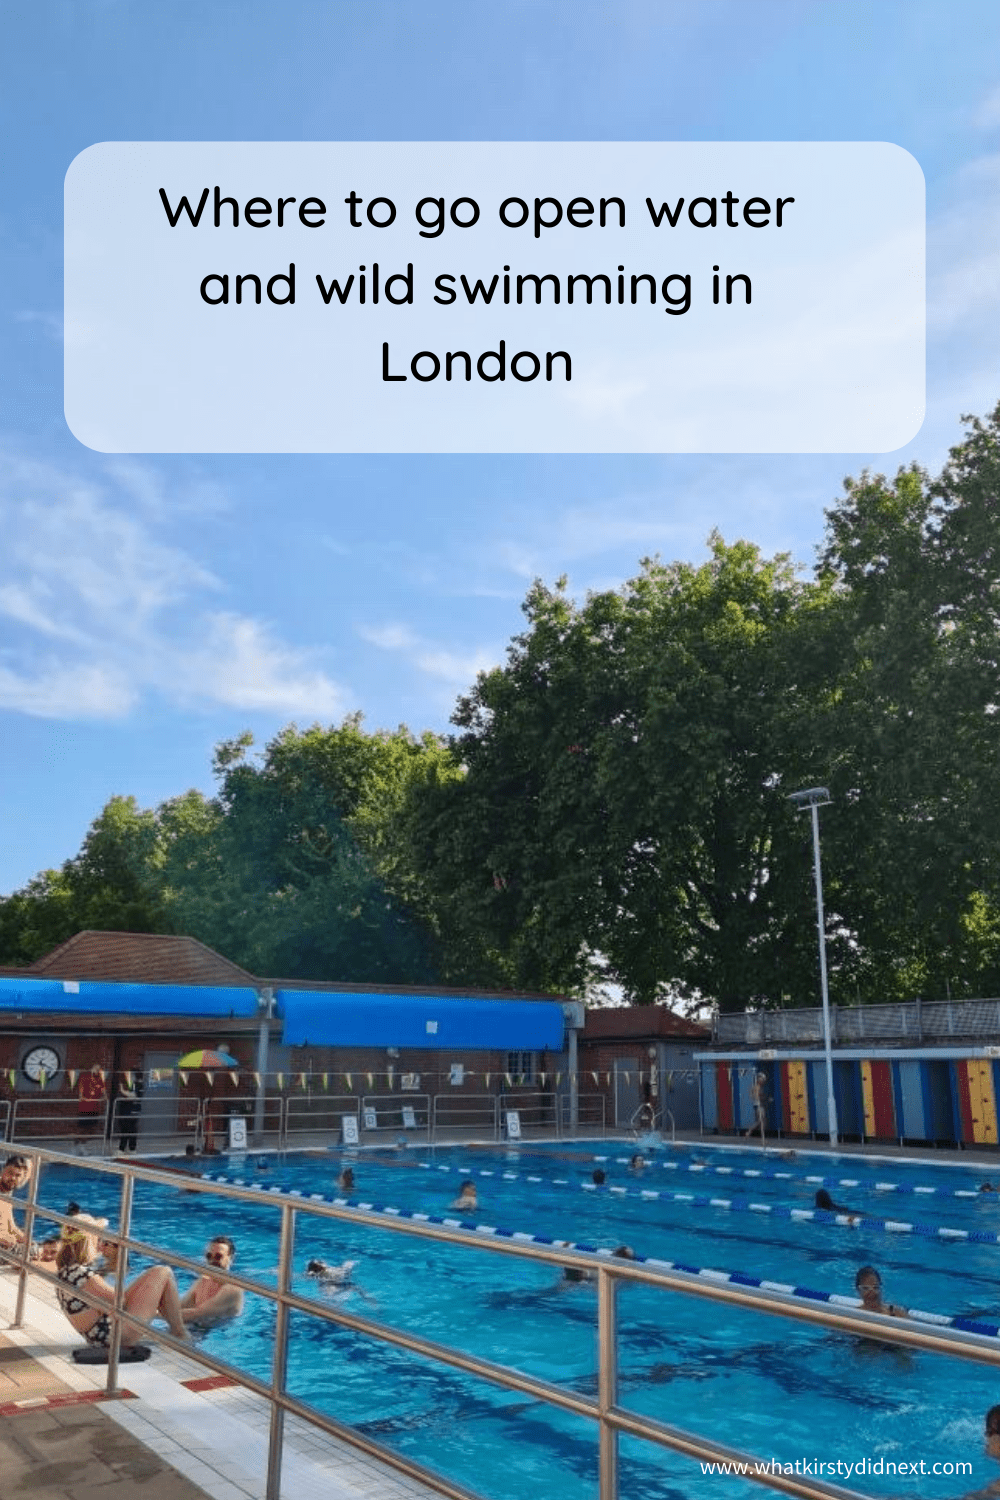 Open water and wild swimming in London